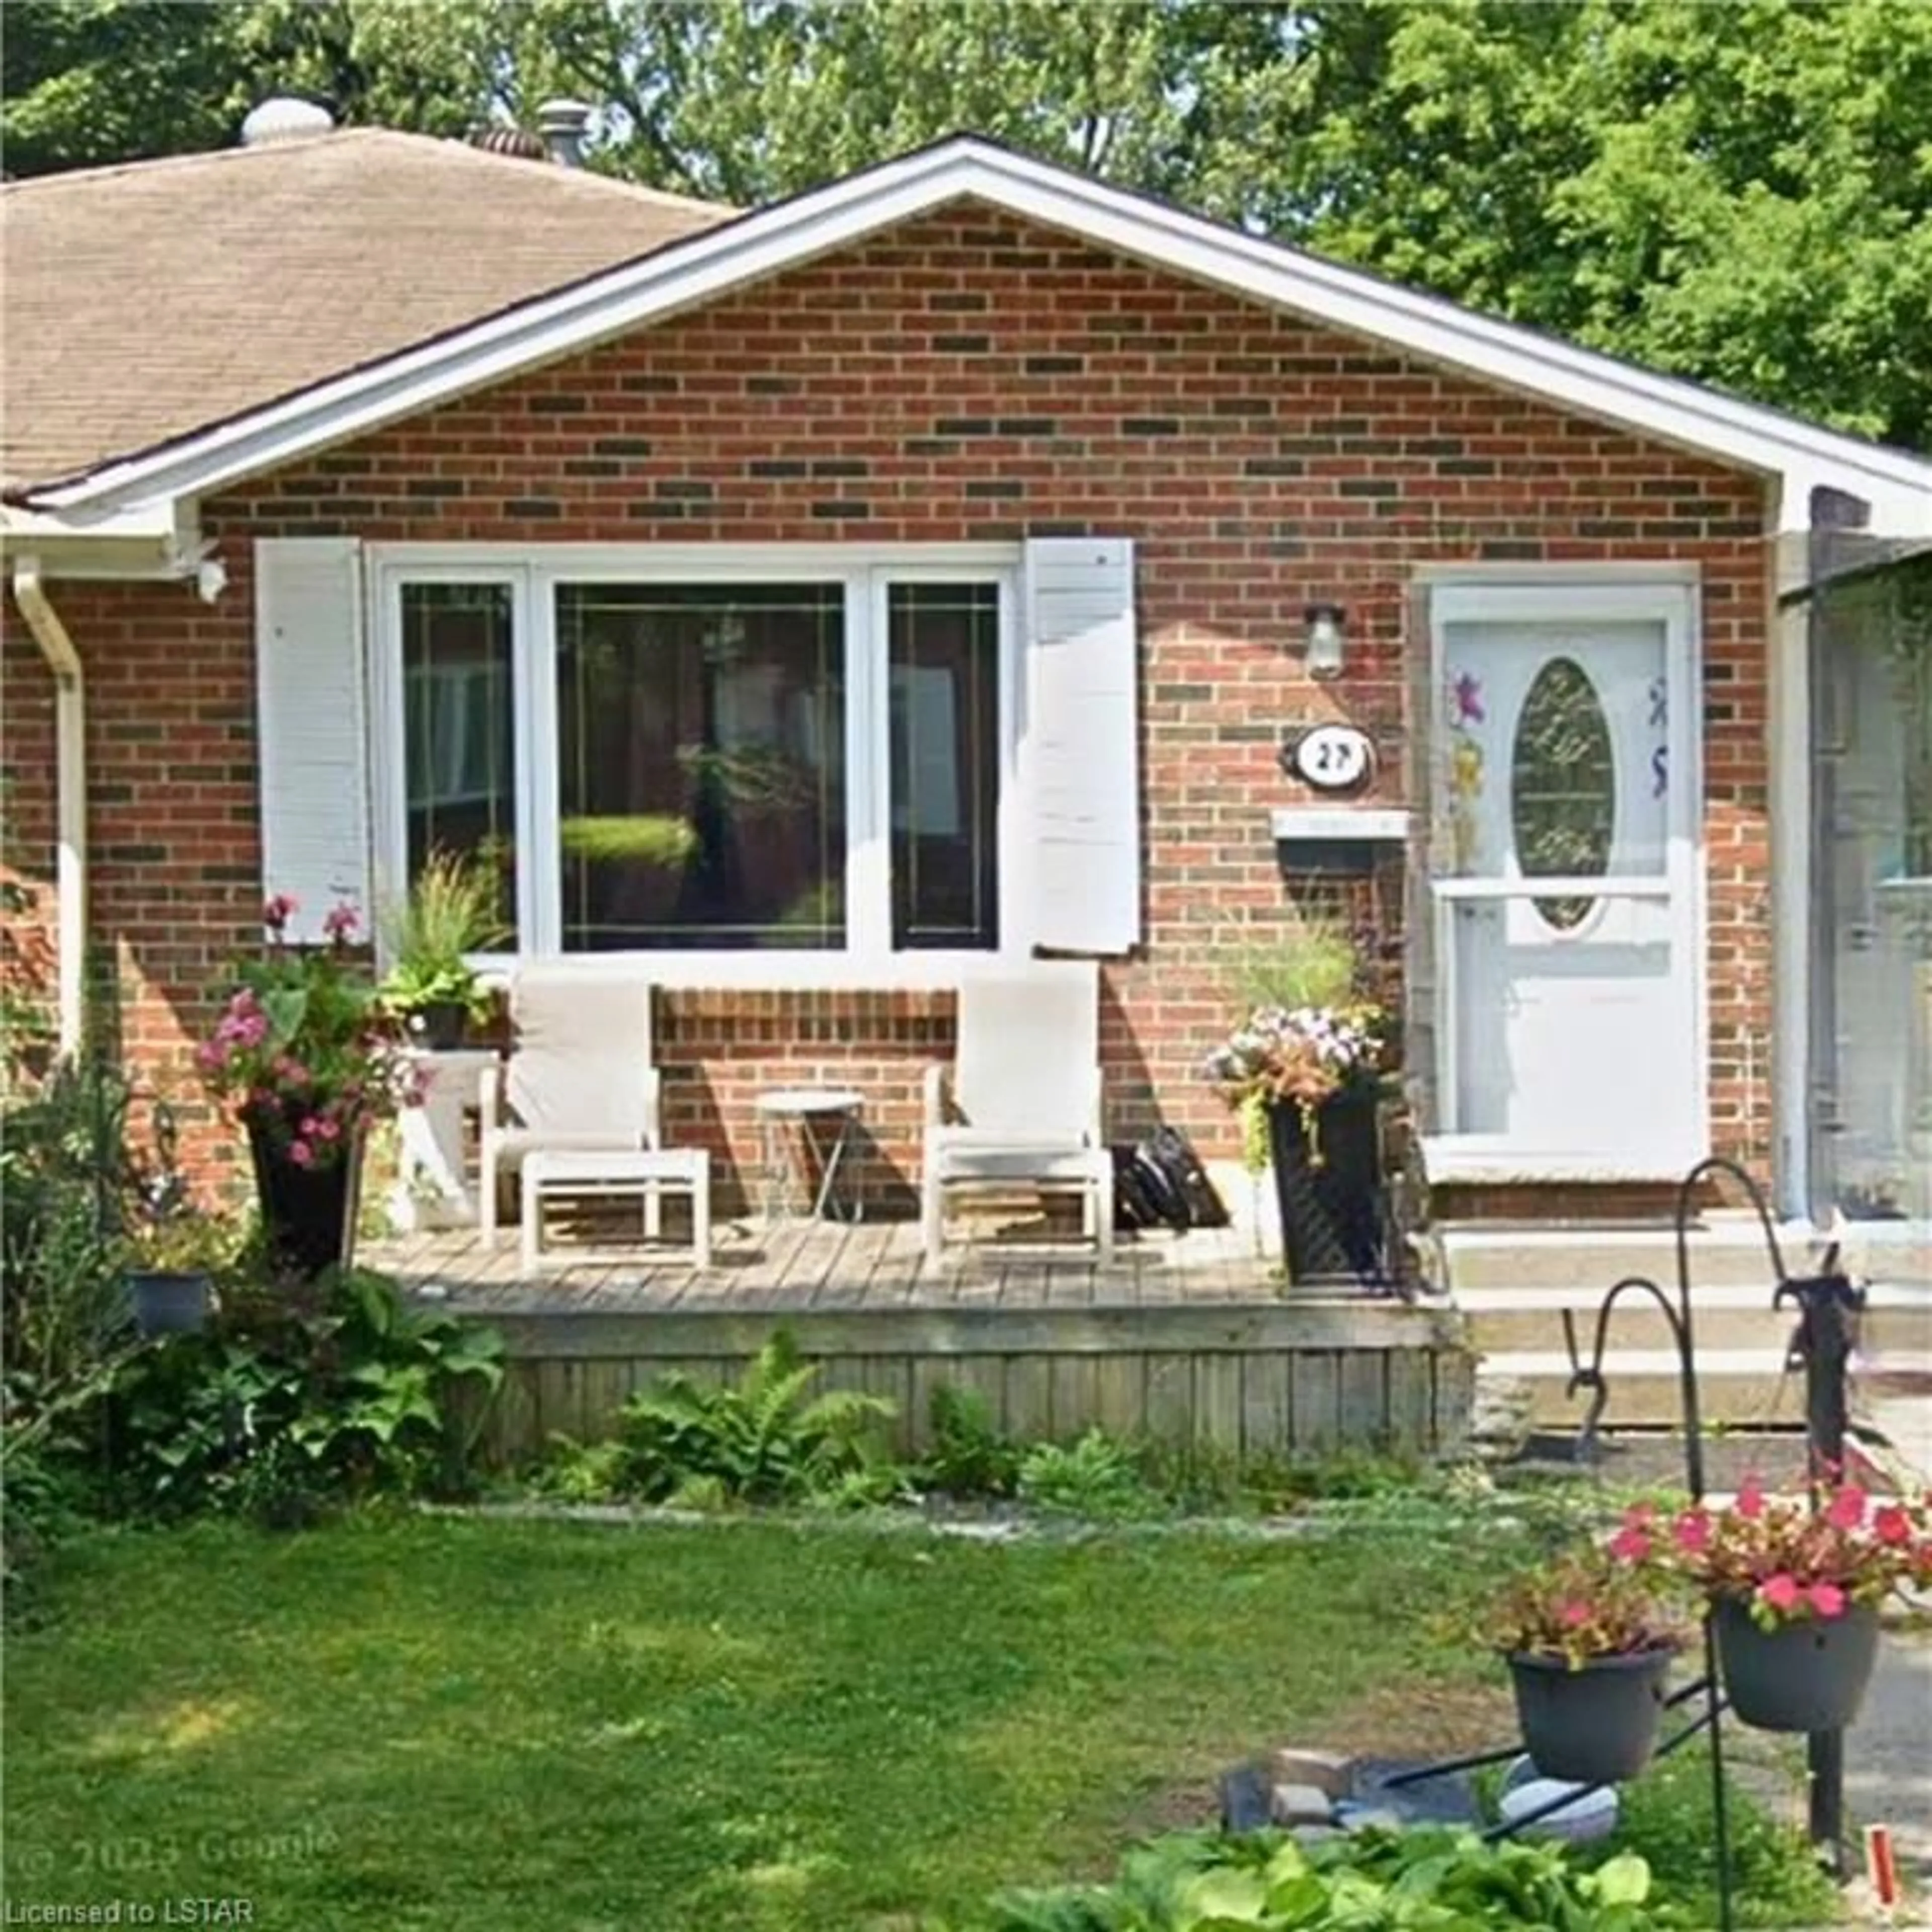 Home with brick exterior material for 27 Wenlock Cres, London Ontario N6G 3B5